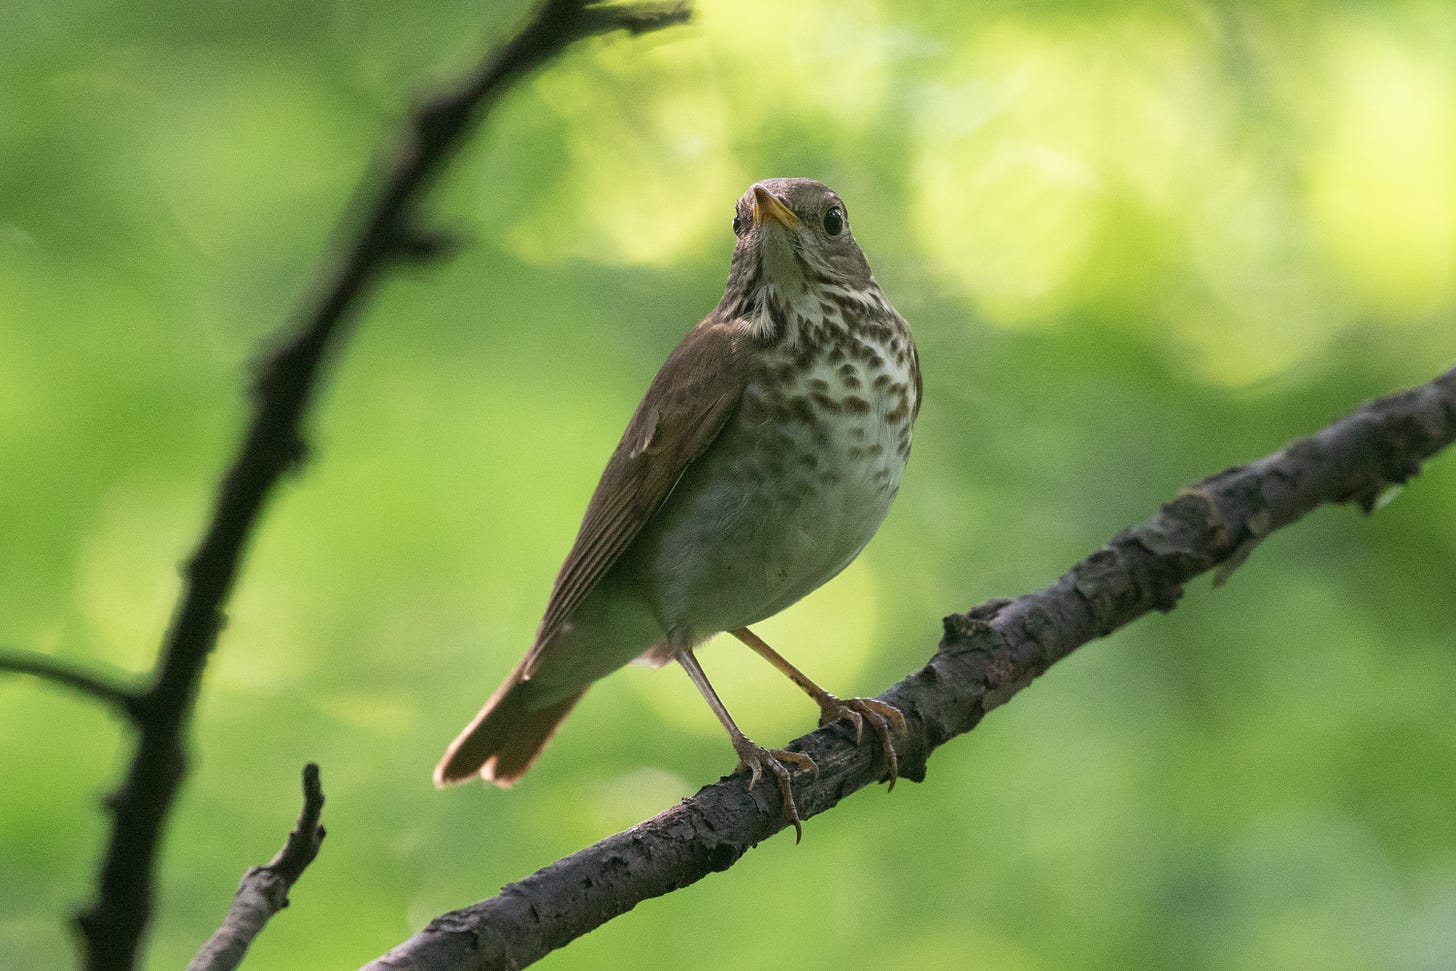 a brown bird with a pale belly and dark spots stands in the shade on a thin twig against a blurry green background